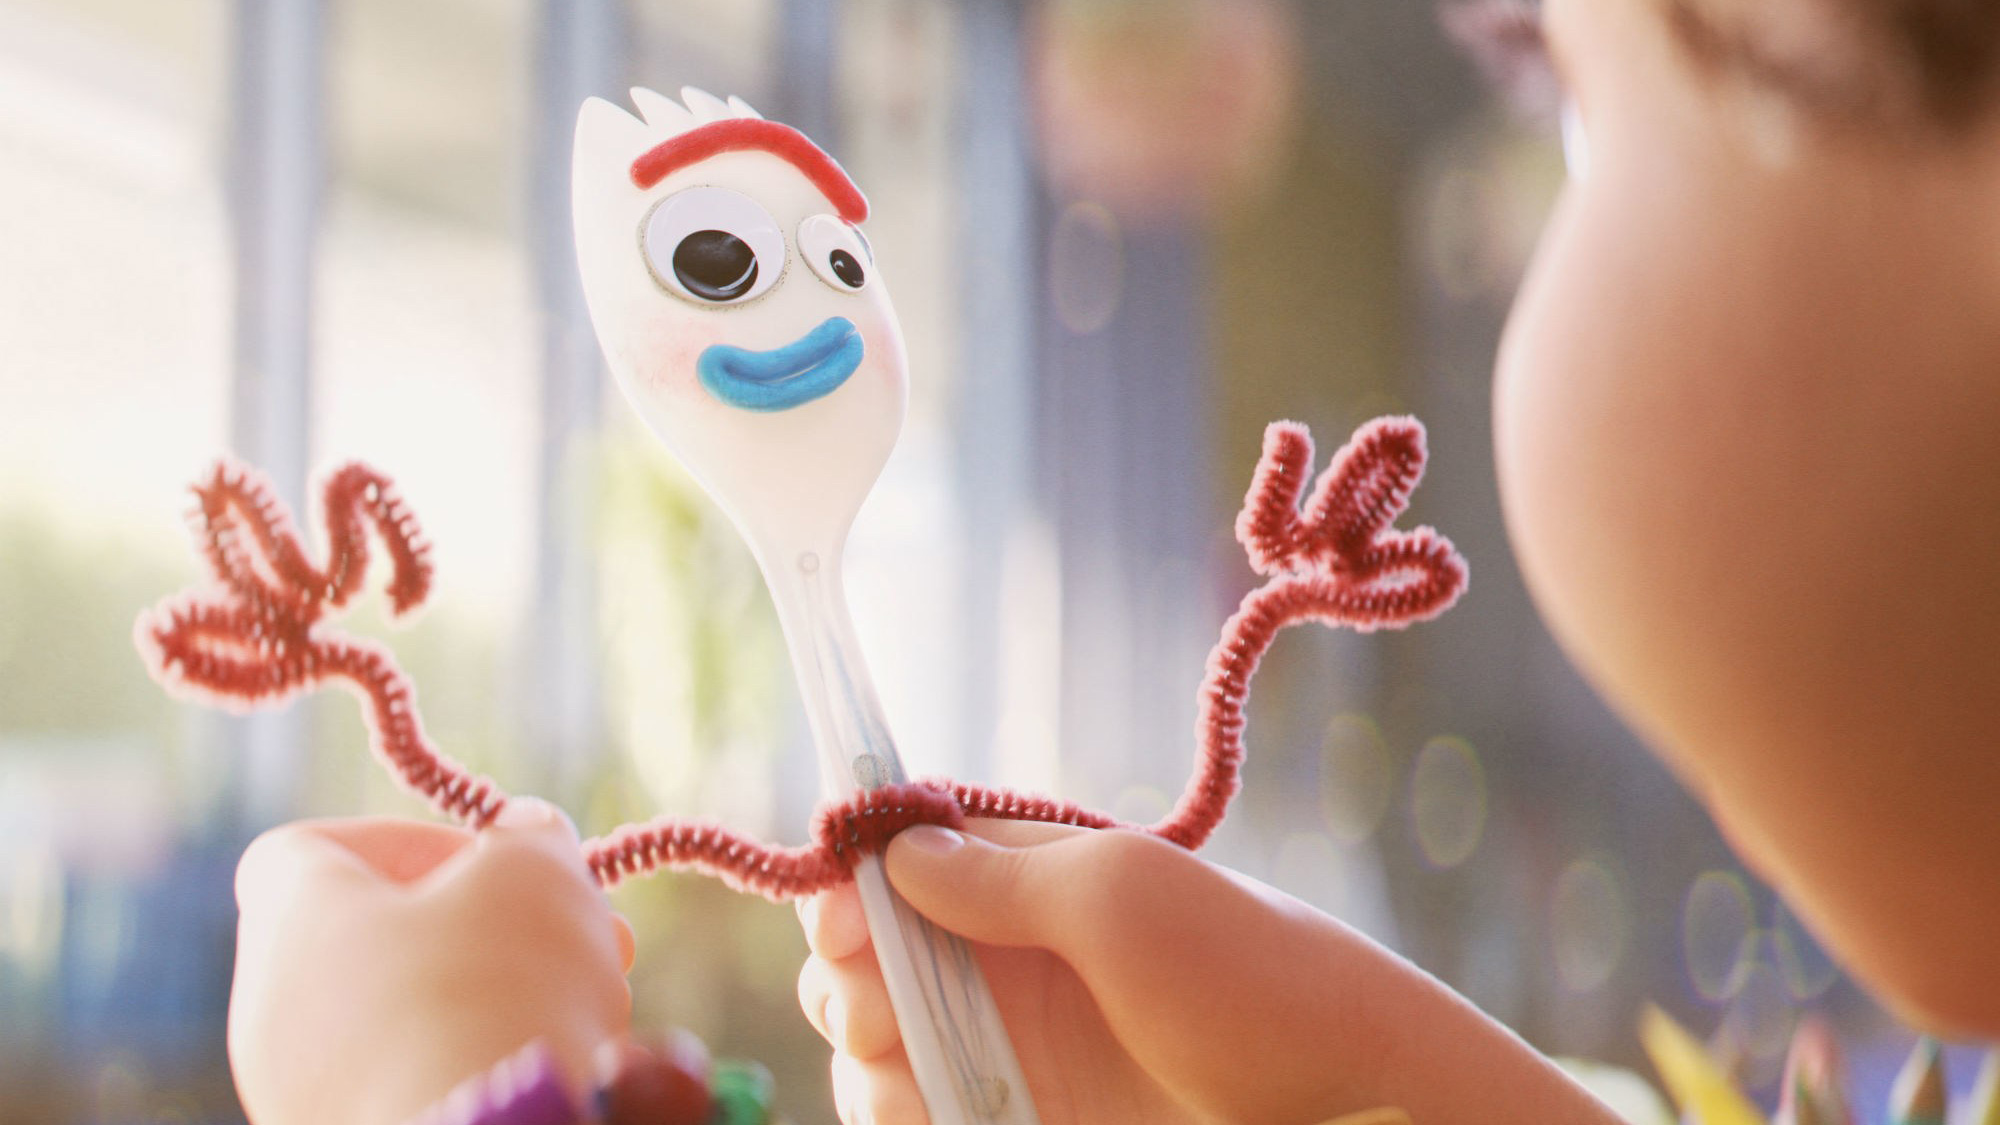 Forky in "Toy Story 4"